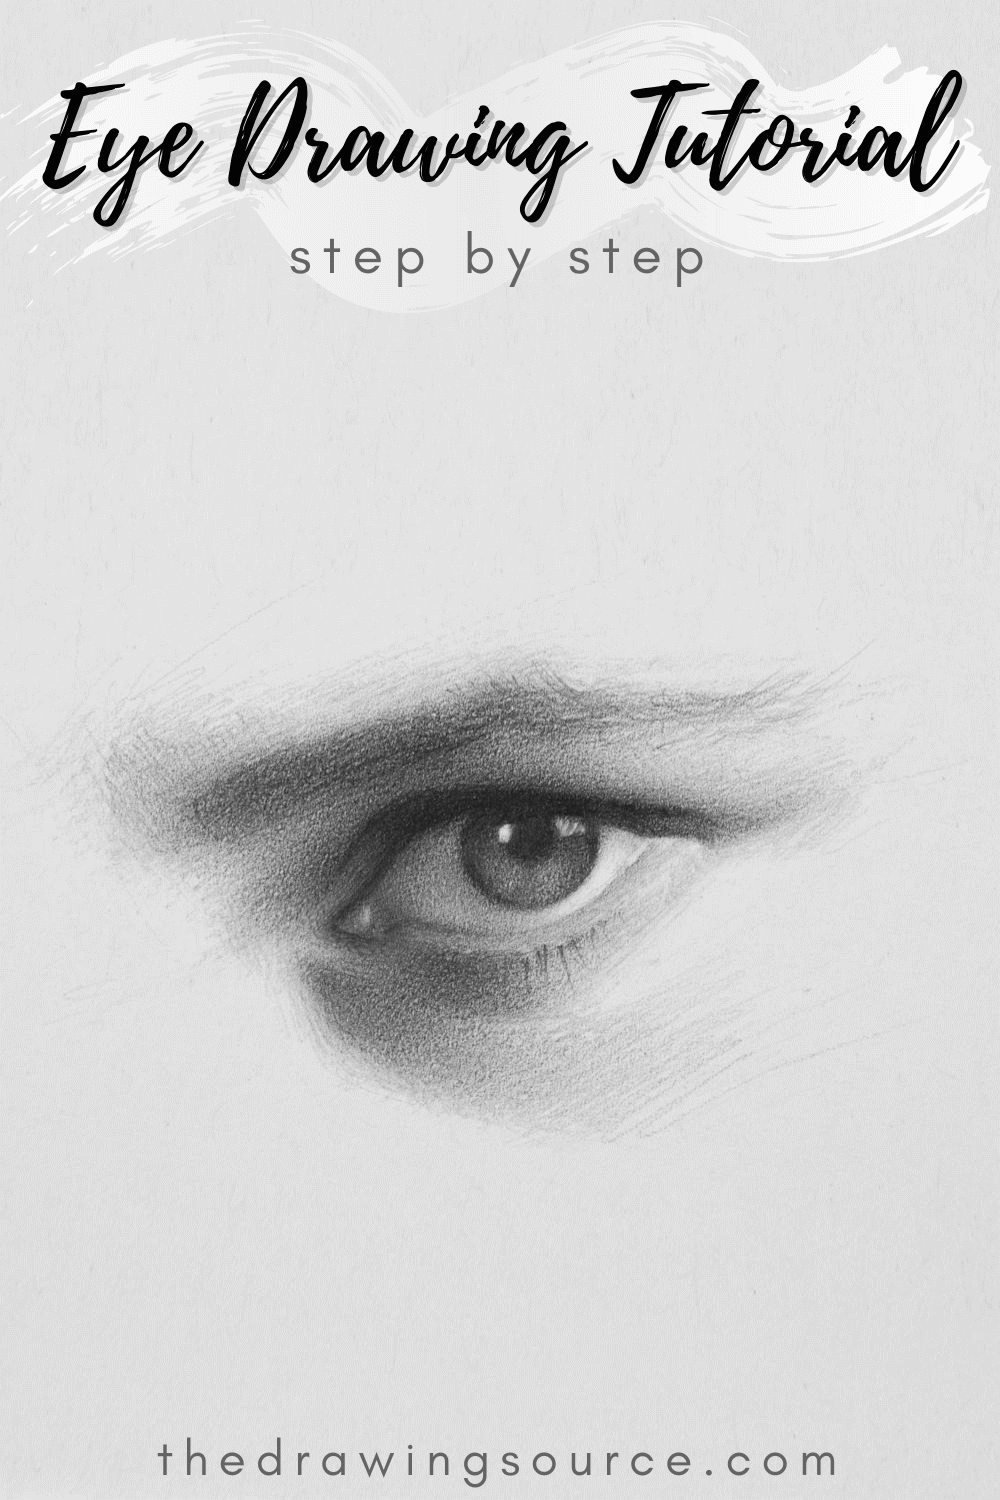 How to Sketch Eyes correctly in 9 simple Steps